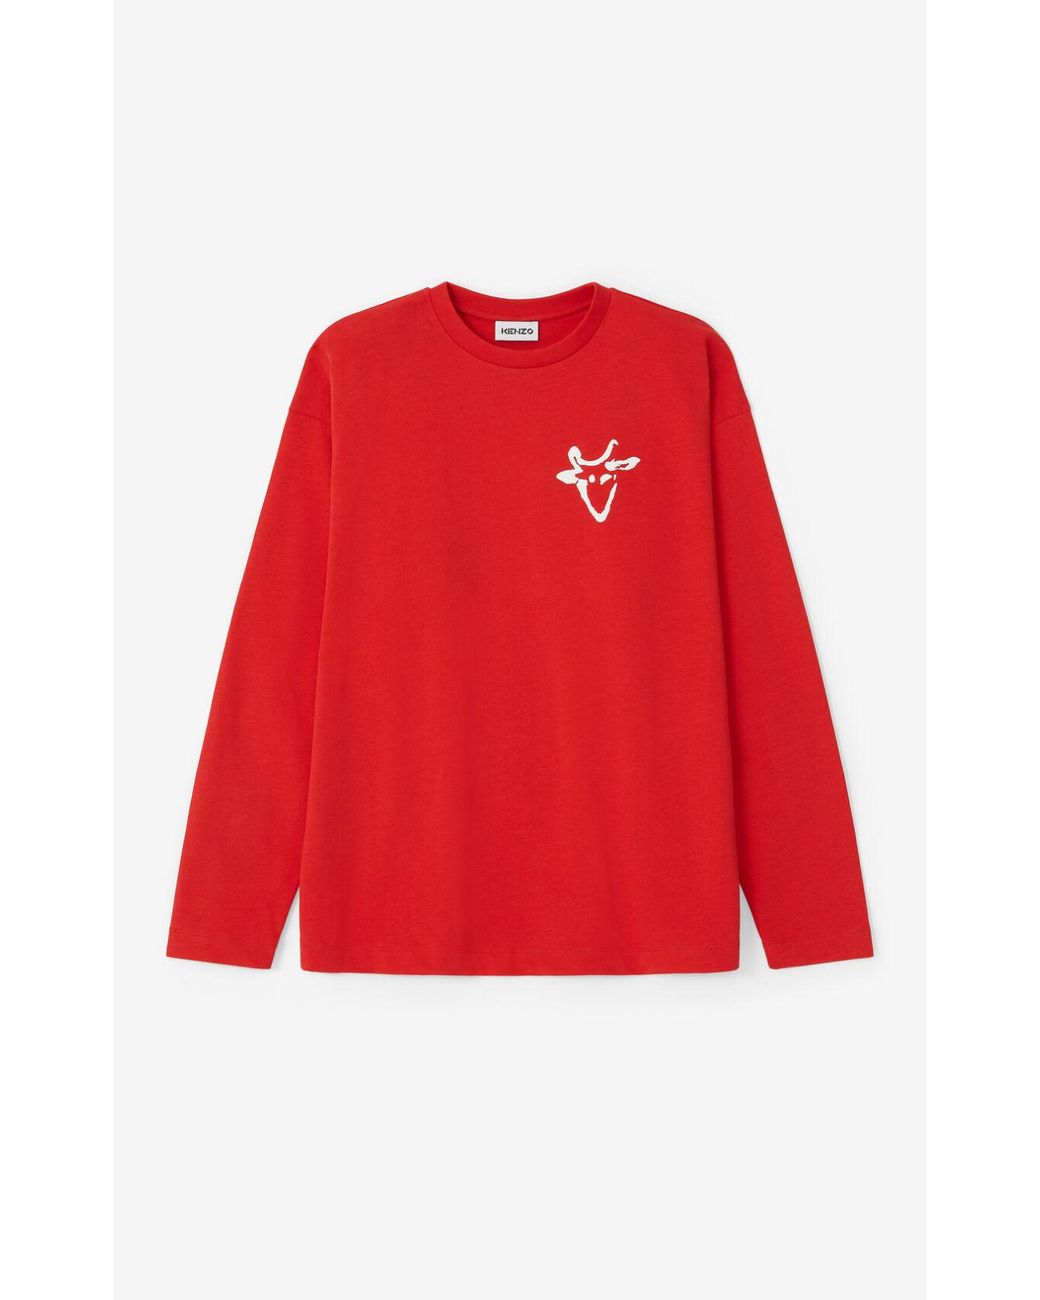 KENZO Cotton Ideogram' Oversized T-shirt in Red for Men - Lyst